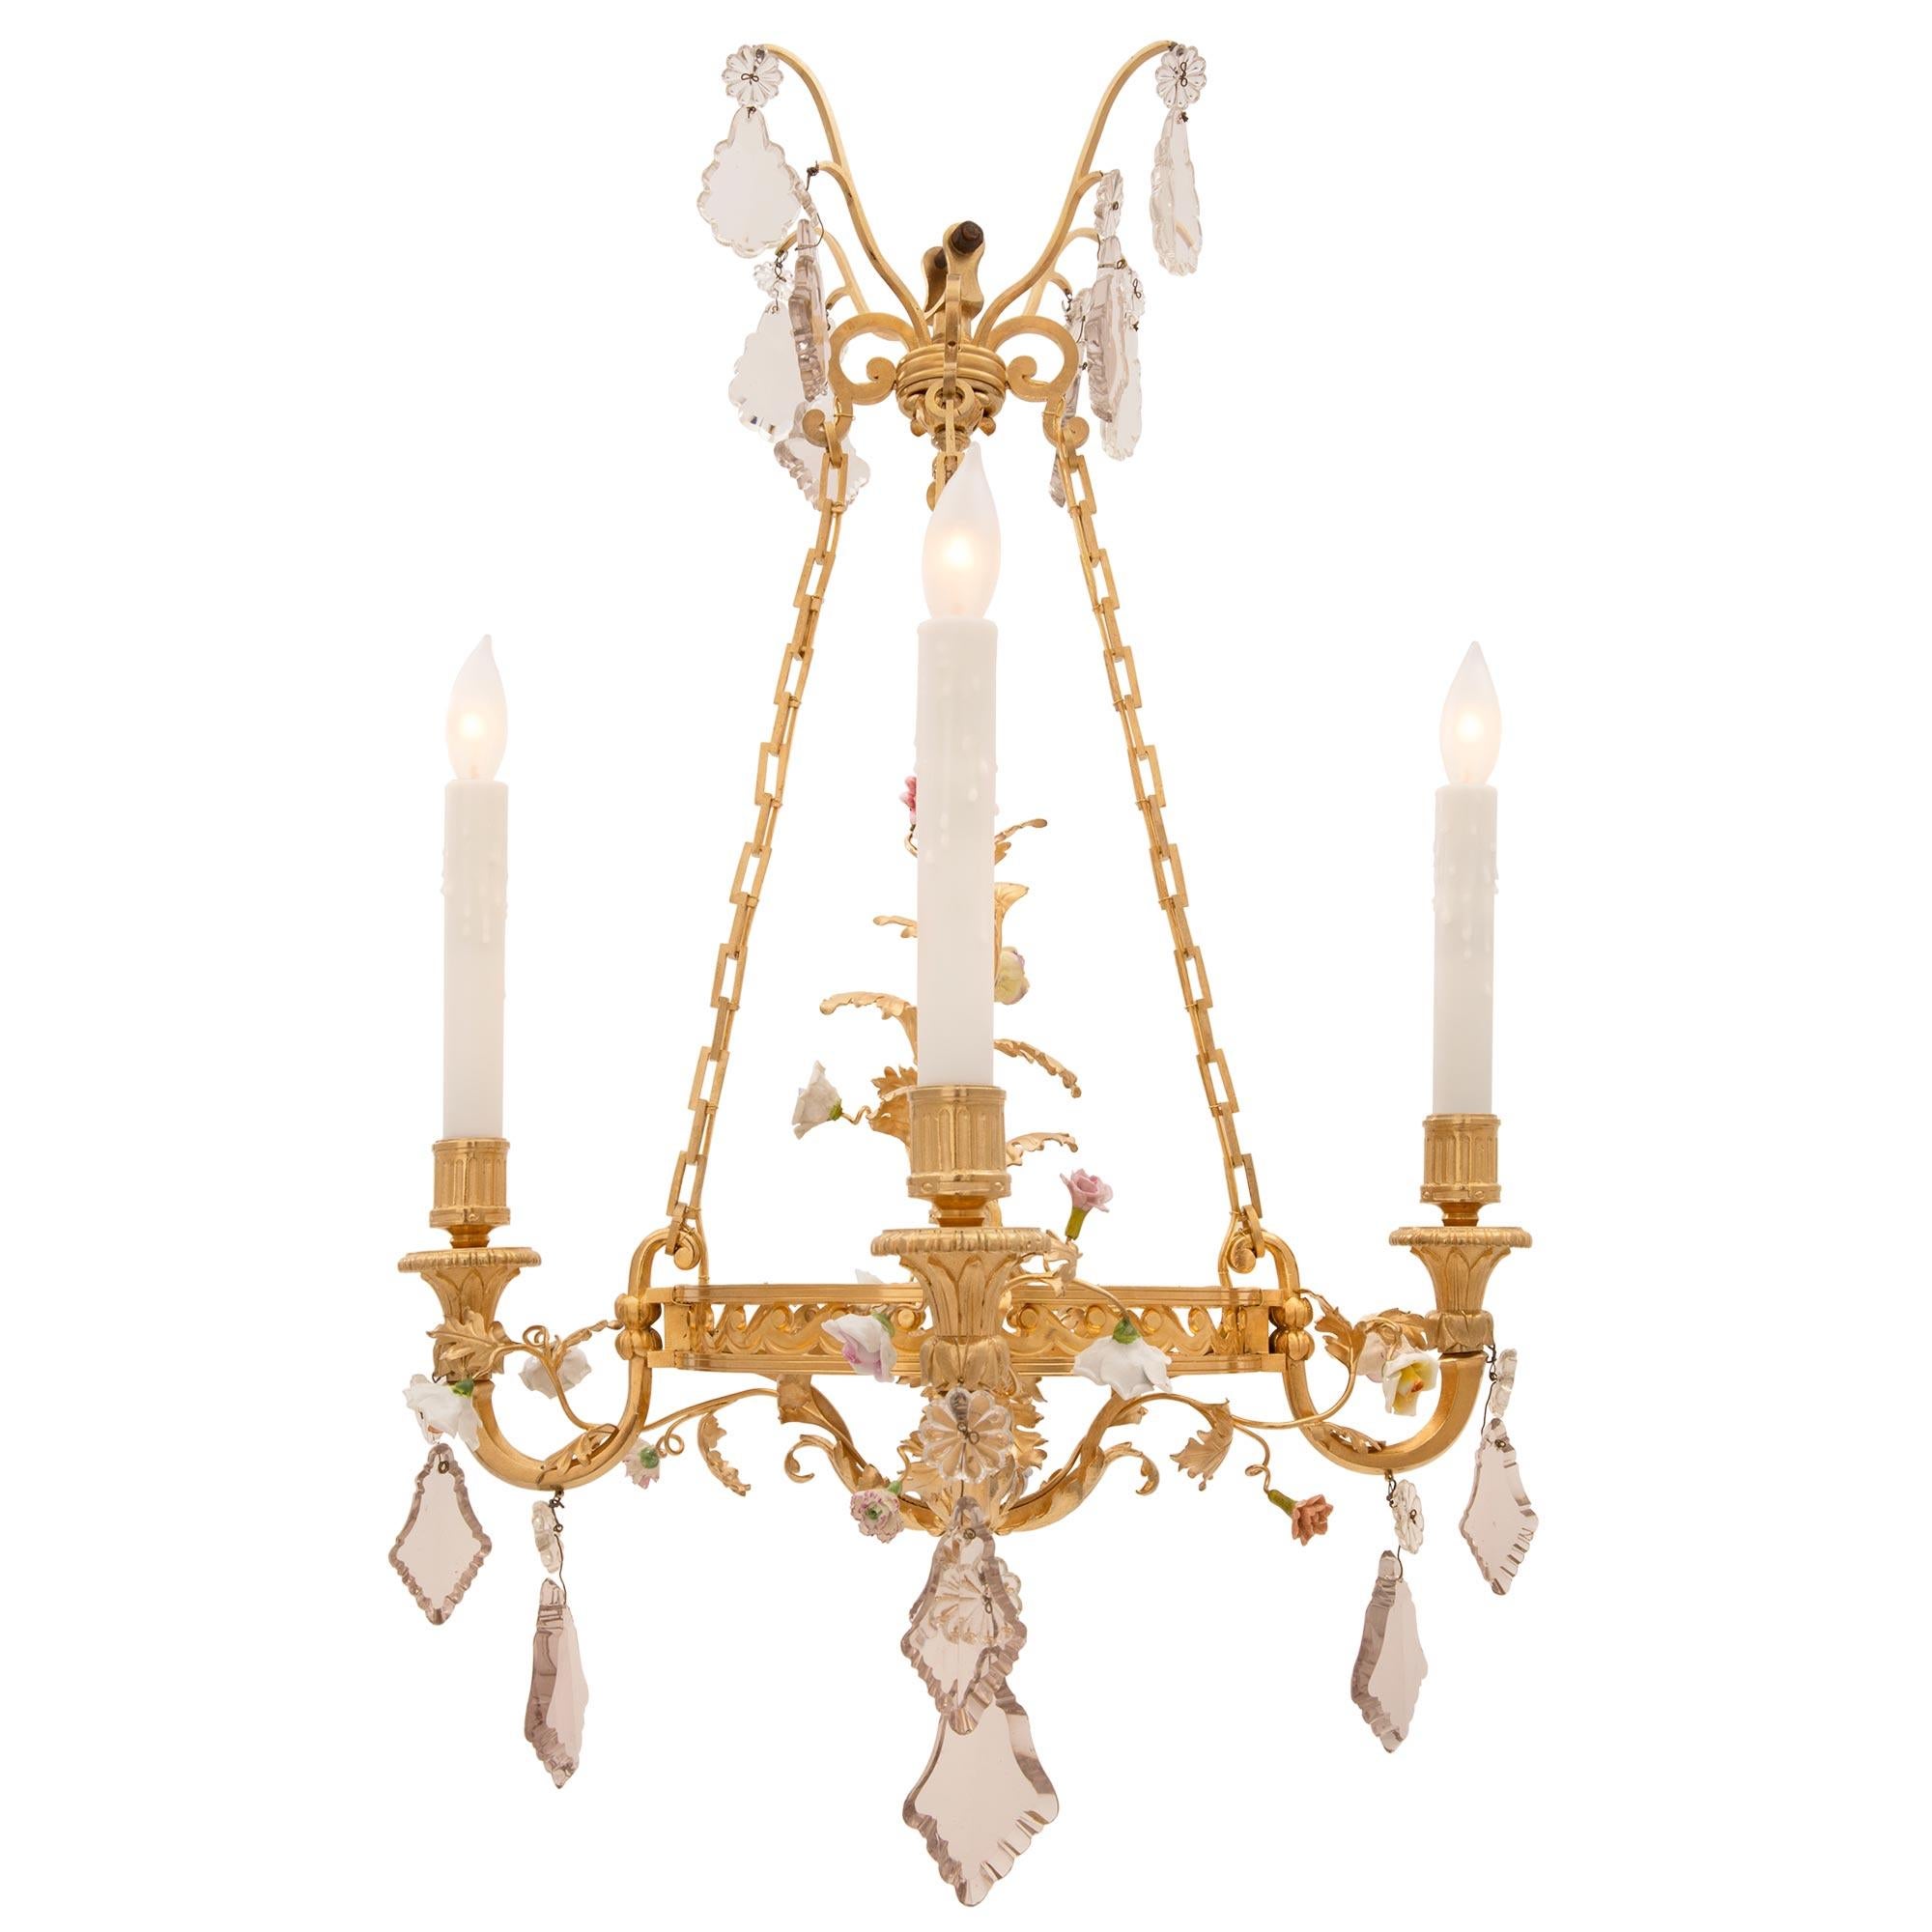 A striking and most elegant French 19th century Louis XVI st. Belle Époque period ormolu, Baccarat crystal and Saxe porcelain chandelier. The chandelier is centered by a lovely finely detailed bottom acorn finial below large decorative acanthus